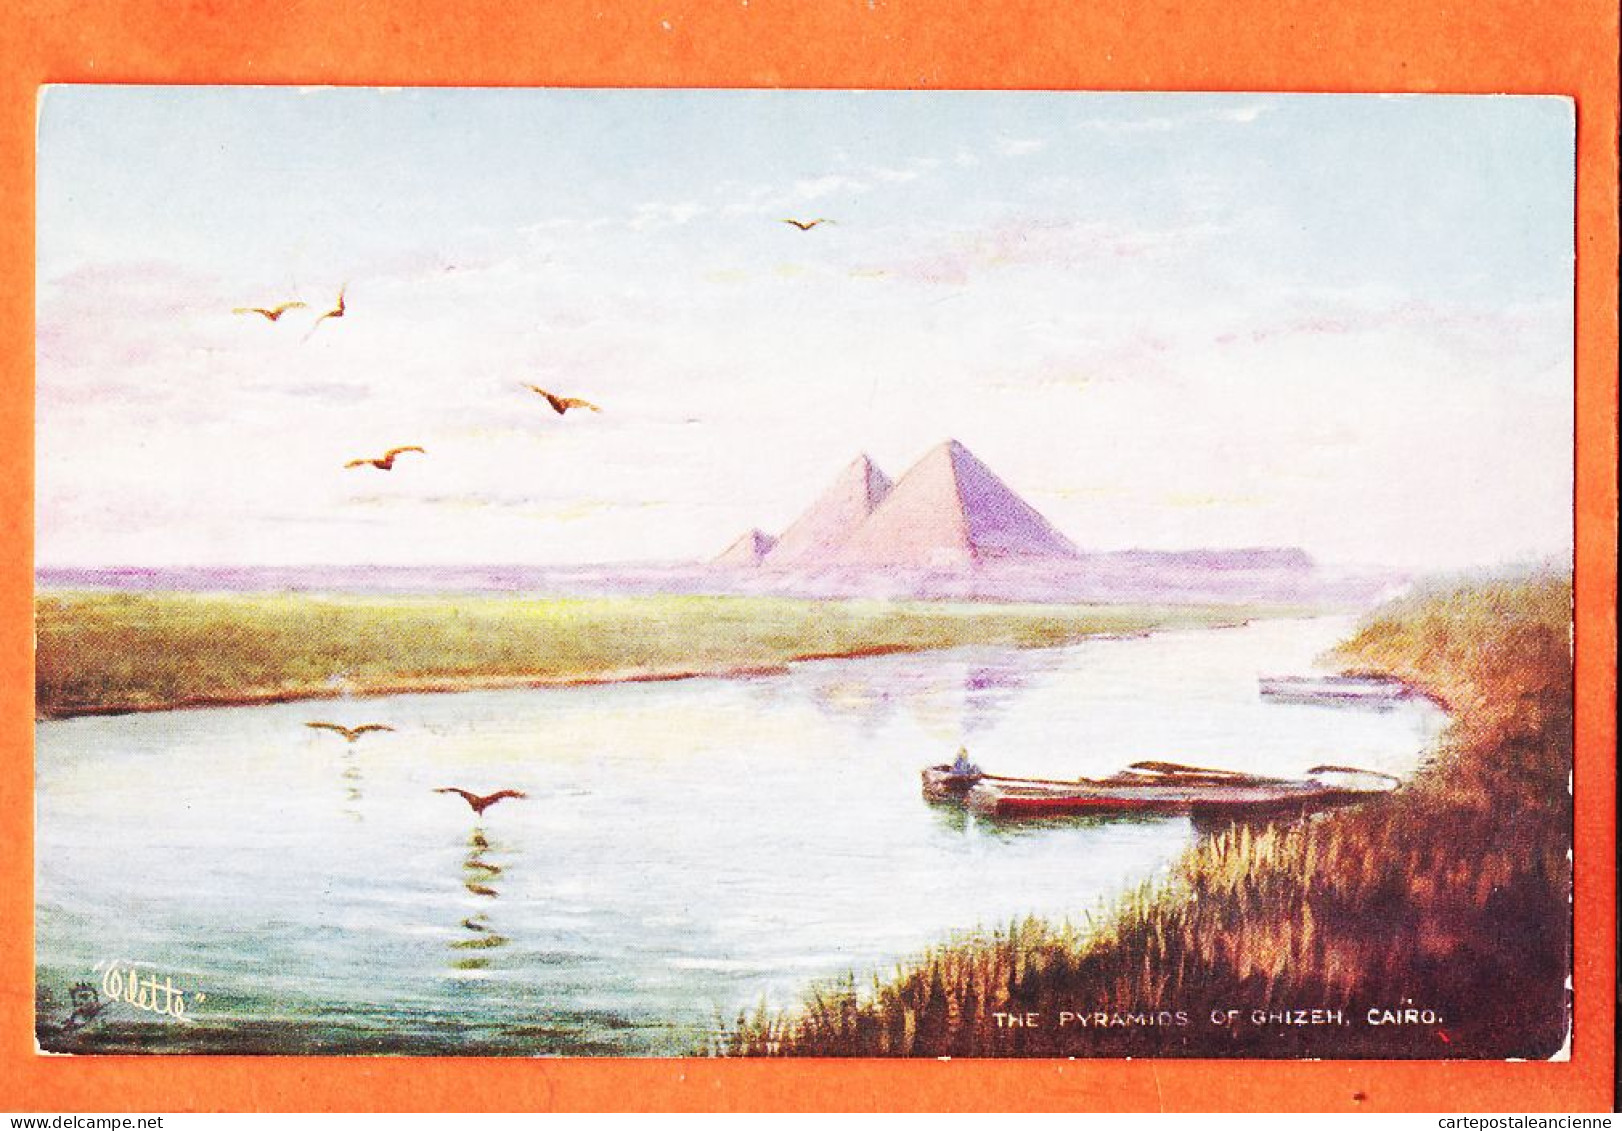 09962 / ⭐  Lithographie OILETTE Egypte ◉ Pyramides CAIRO Pyramids Of GIZEH 1905s ◉ RAPHAEL TUCK Picturesque EGYPT 7201 - Guiza